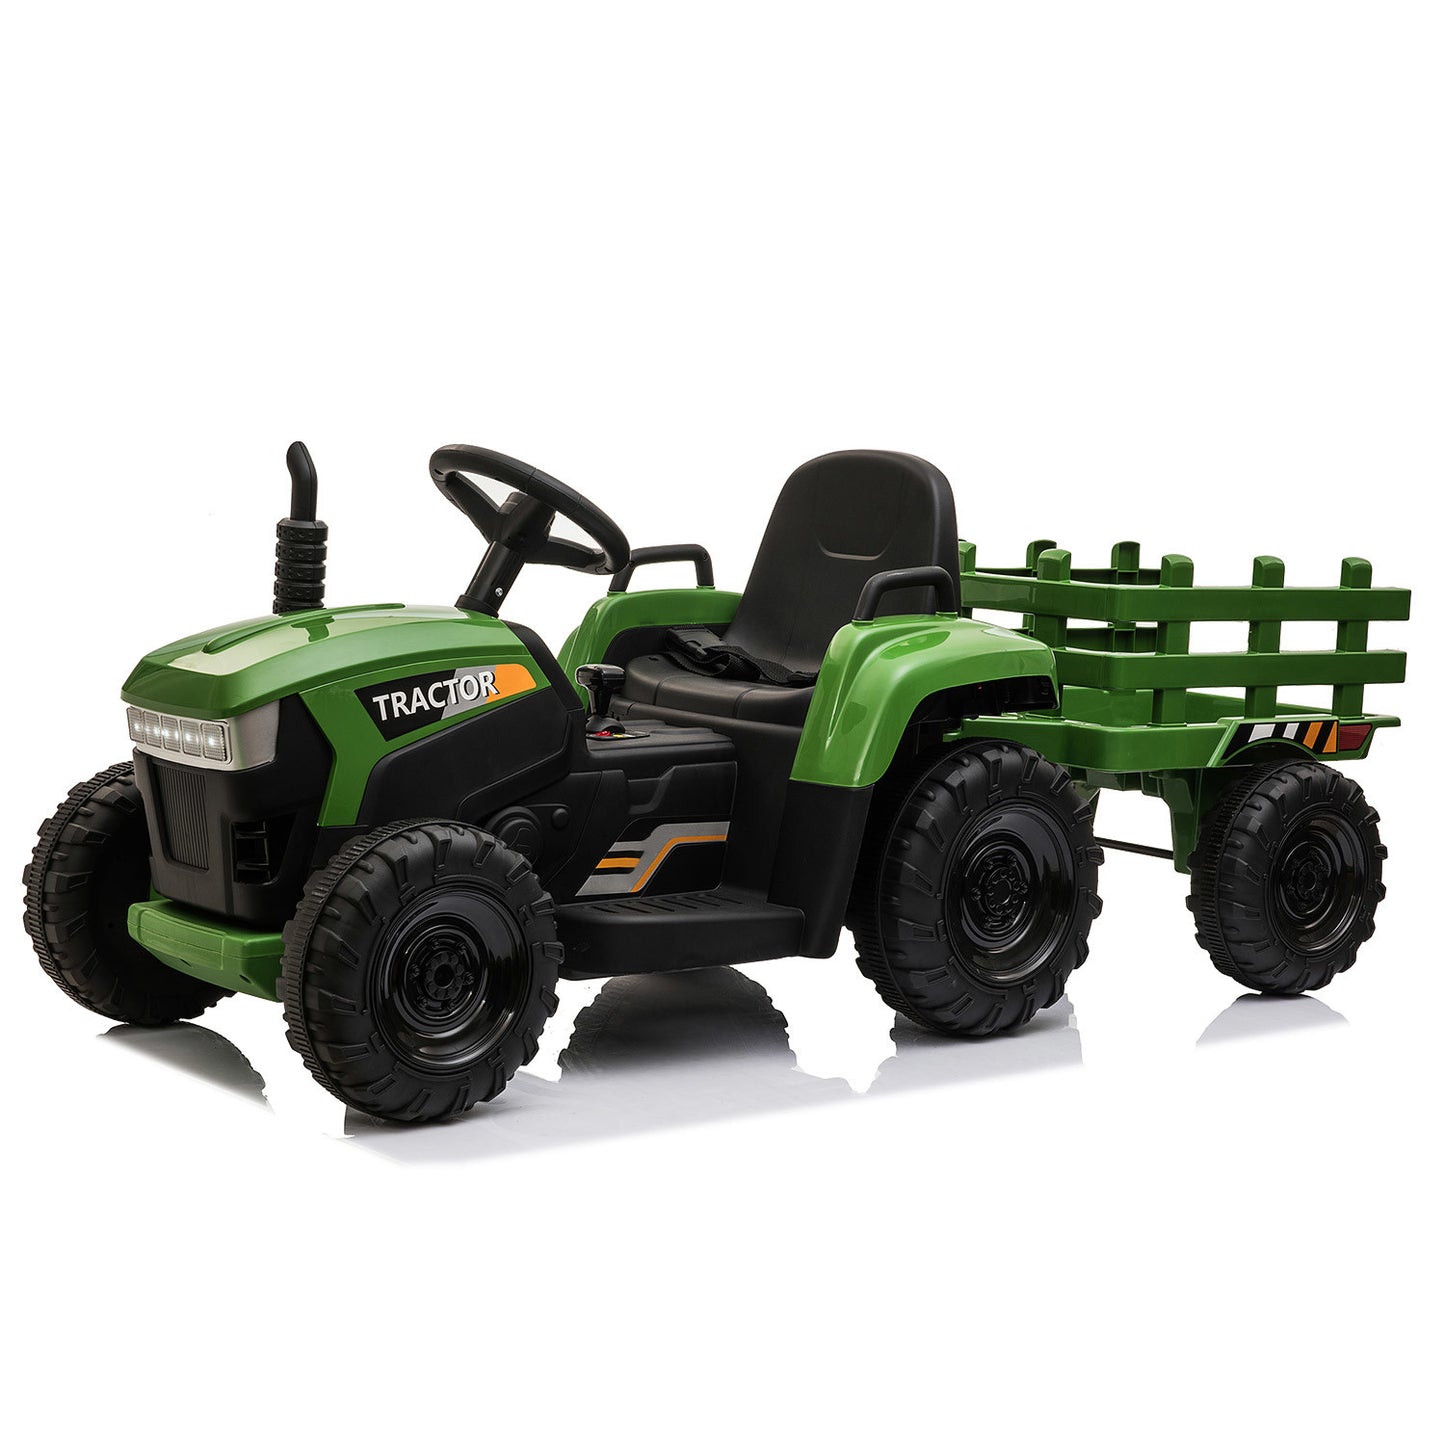 12V Kids Ride On Tractor with Trailer, Battery Powered Electric Car w/ Music, USB, Music, LED Lights, Vehicle Toy for 3 to 6 Ages, Dark Green